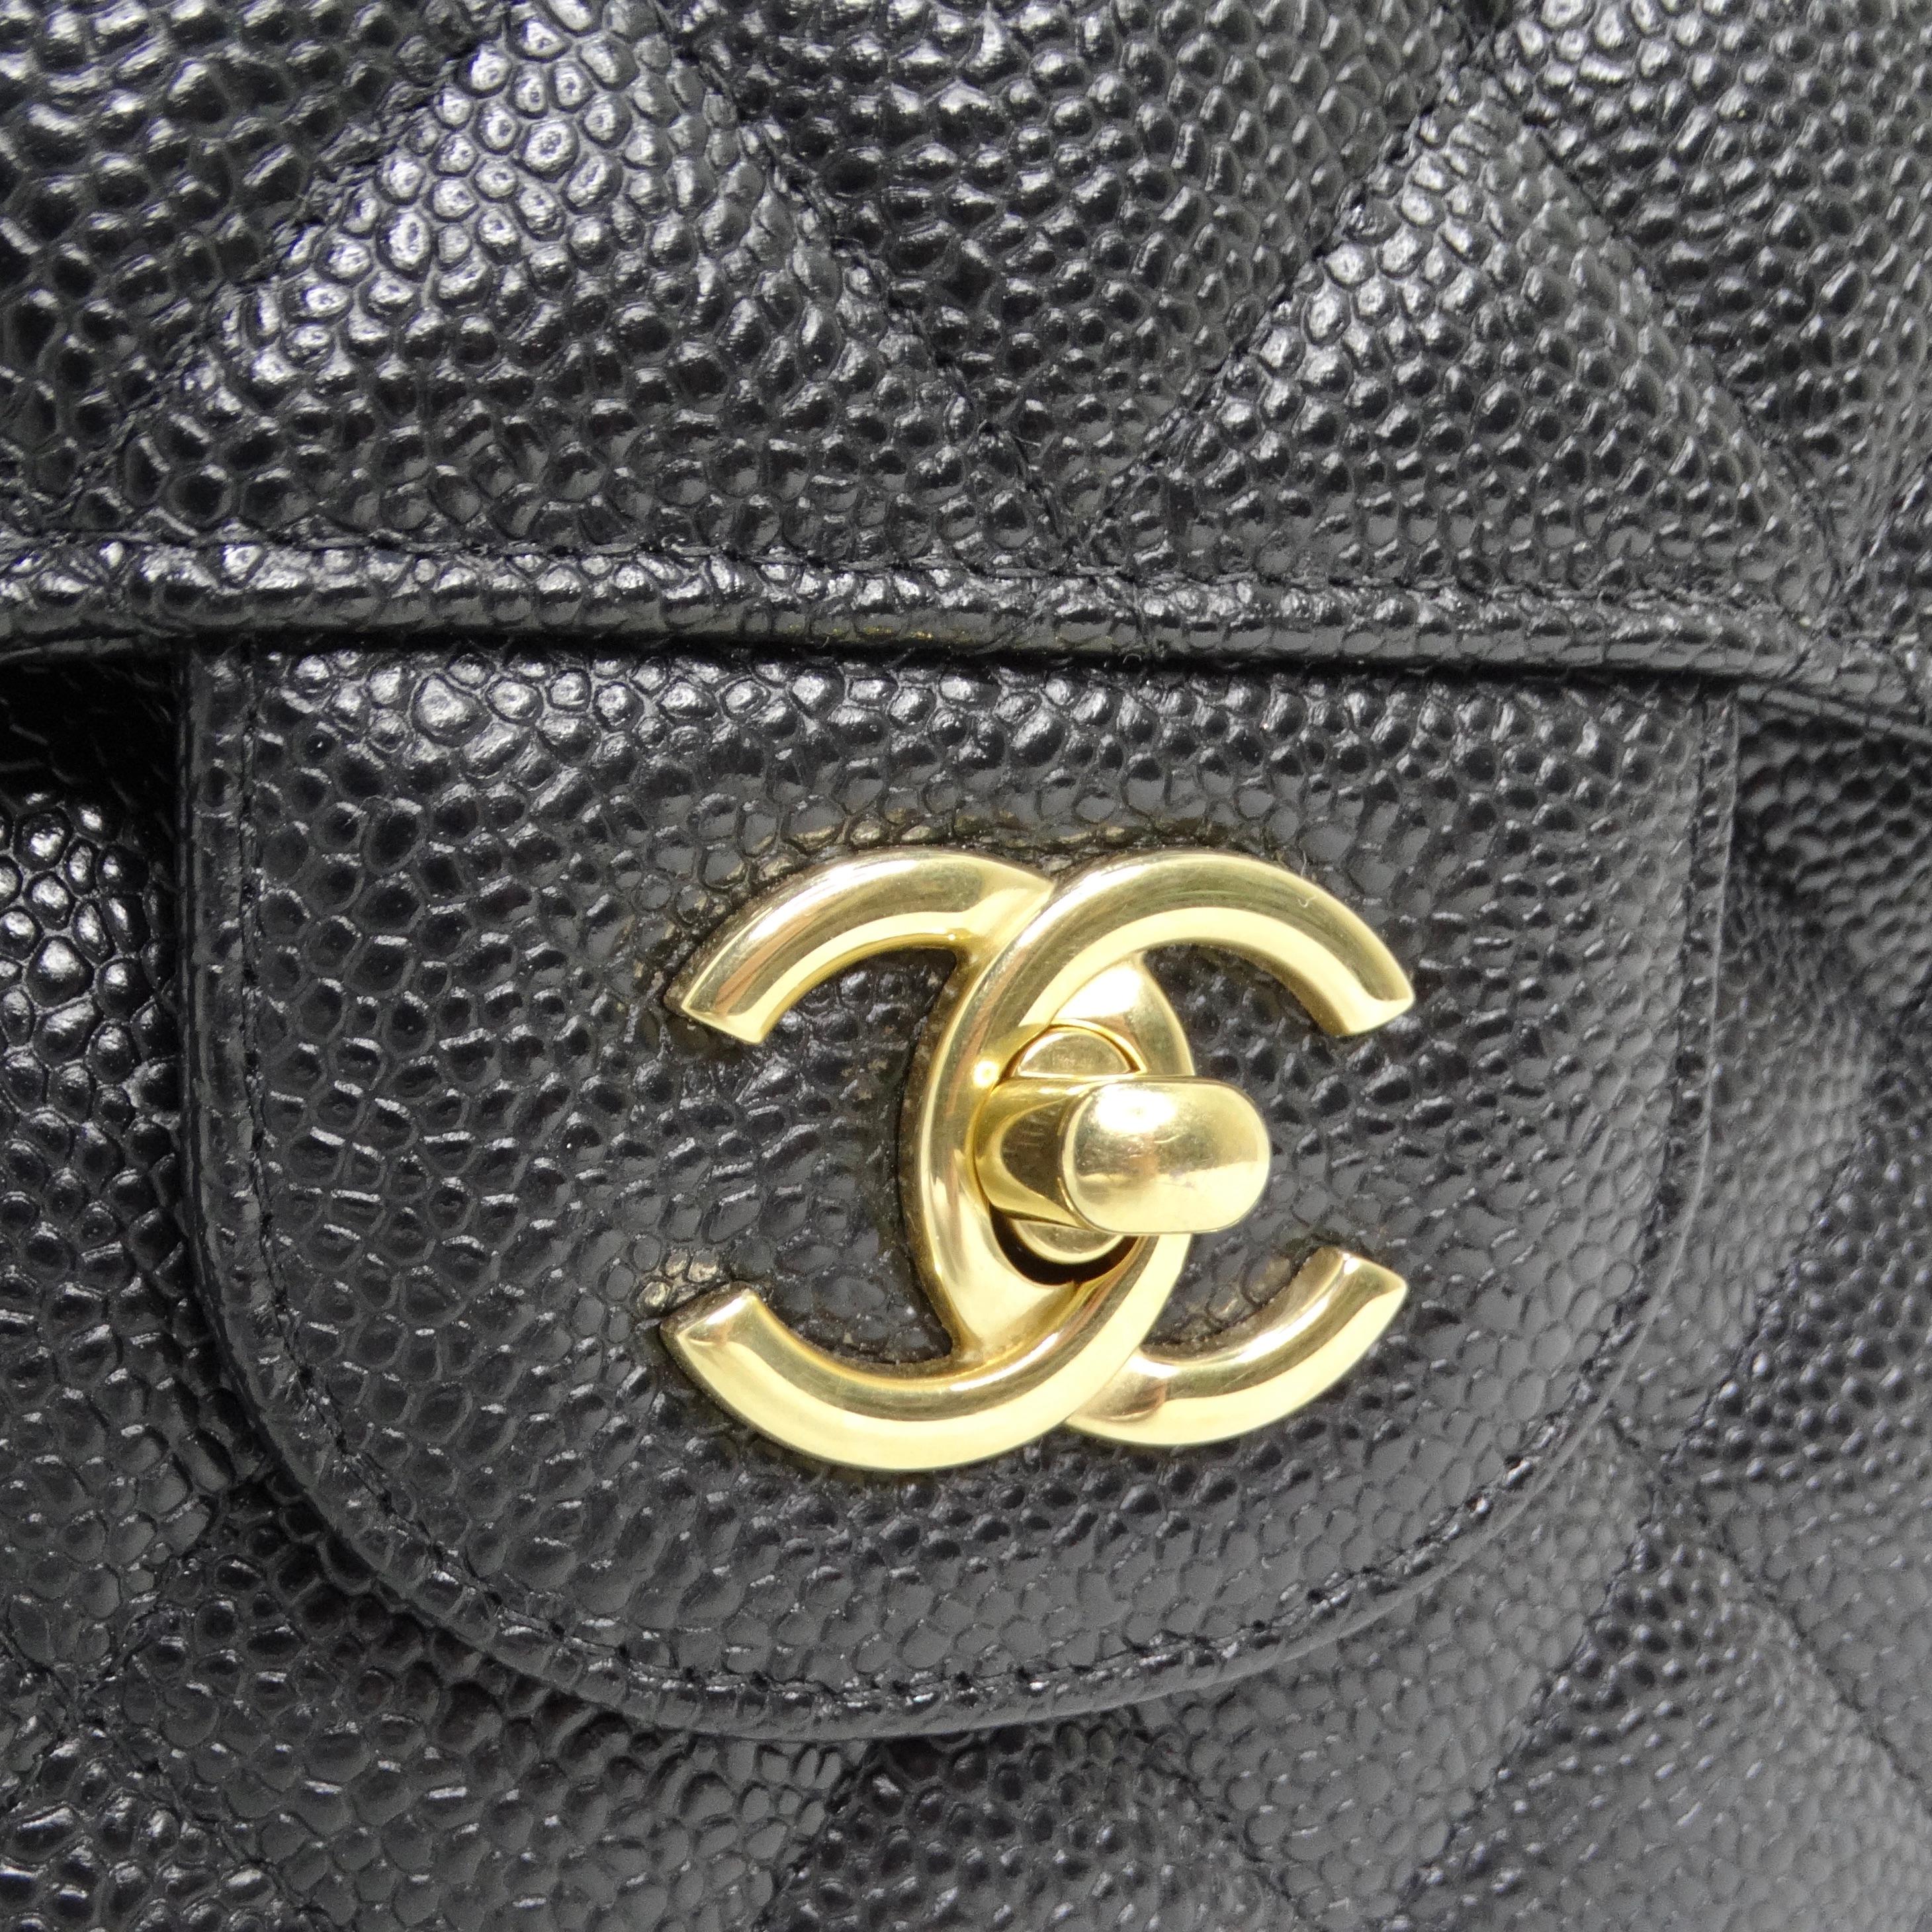 Introducing the Chanel Large Classic Quilted Caviar Handbag in a stunning Black/Burgundy combination, a timeless masterpiece of elegance and sophistication. This is an authentic CHANEL Caviar Quilted Large Double Flap in Black, the epitome of luxury